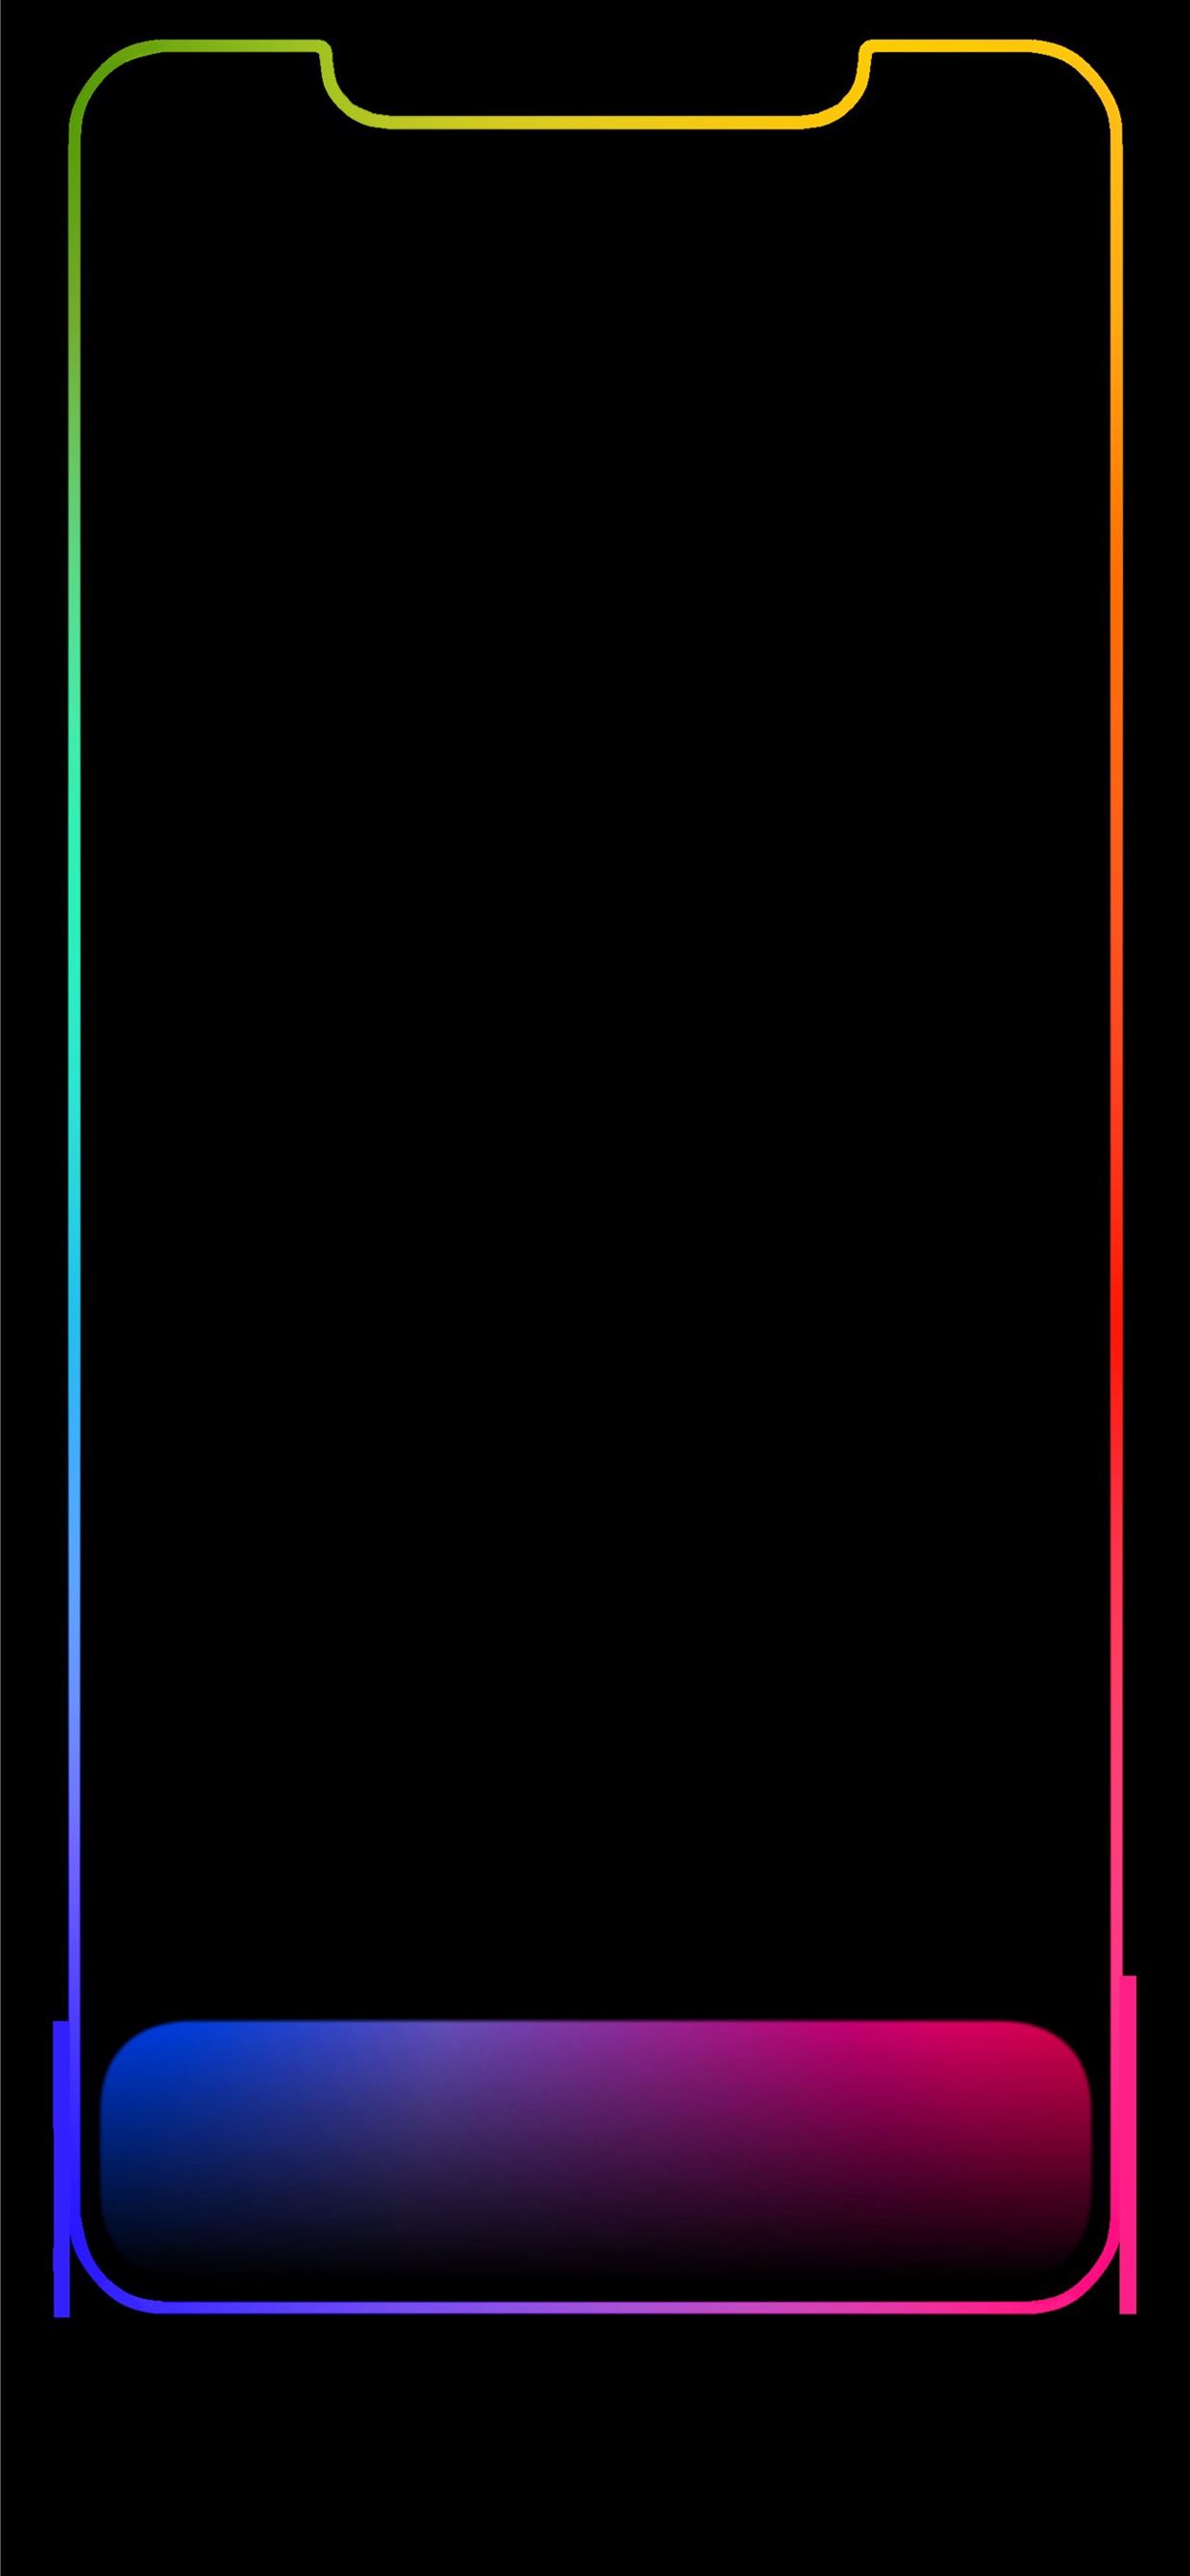 Max Outline Iphone Wallpapers Free Download